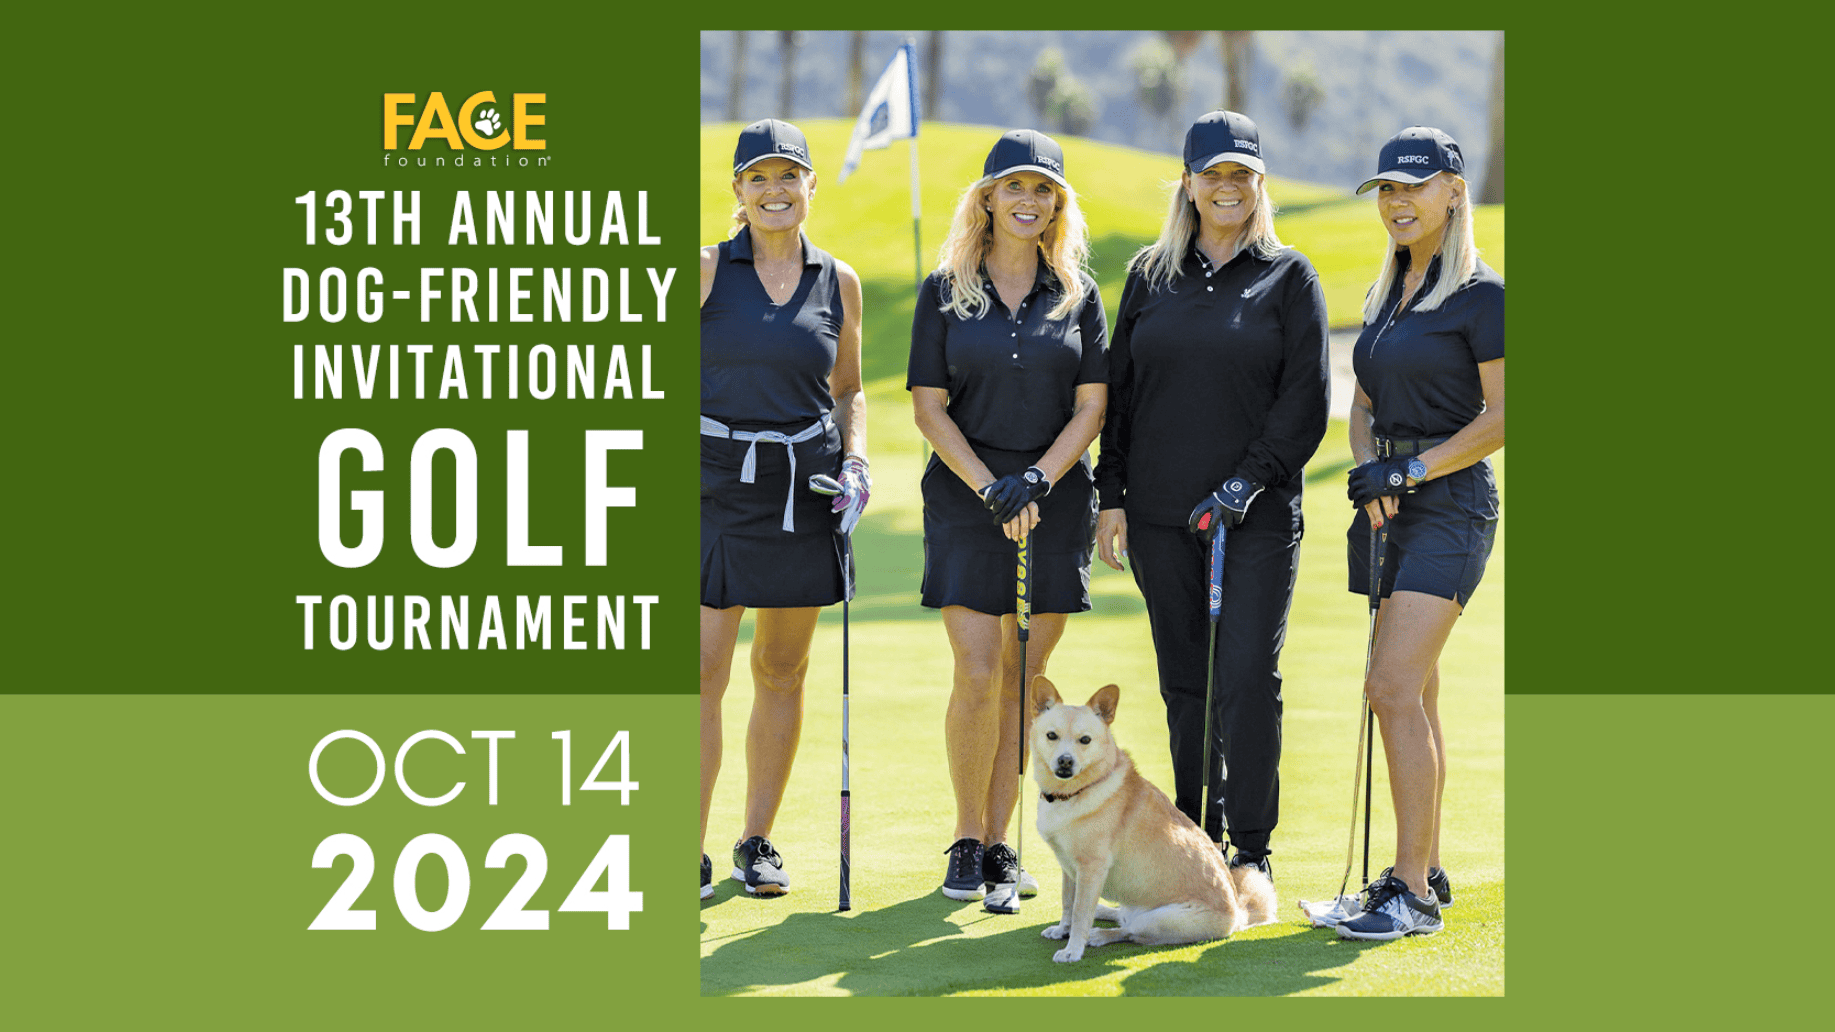 Four excited women, gather on a lush green golf course with a charming golden retriever by their side.